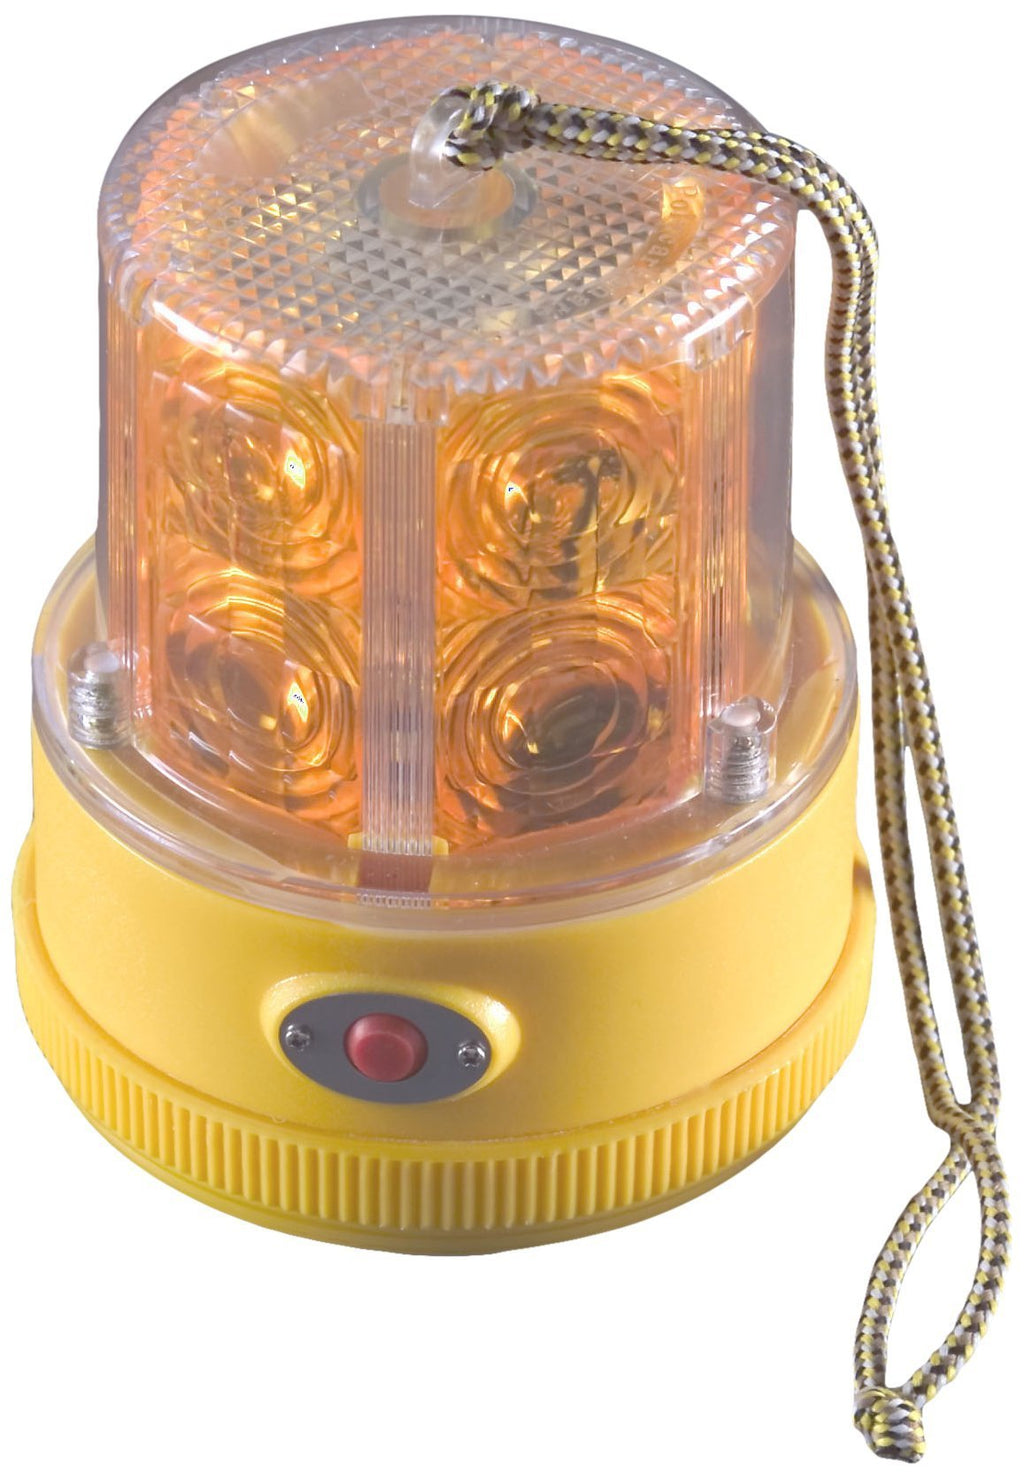 North American Signal PSLM2-A LED Personal Safety Warning Light with Magnetic Mount, Battery Operated, Amber